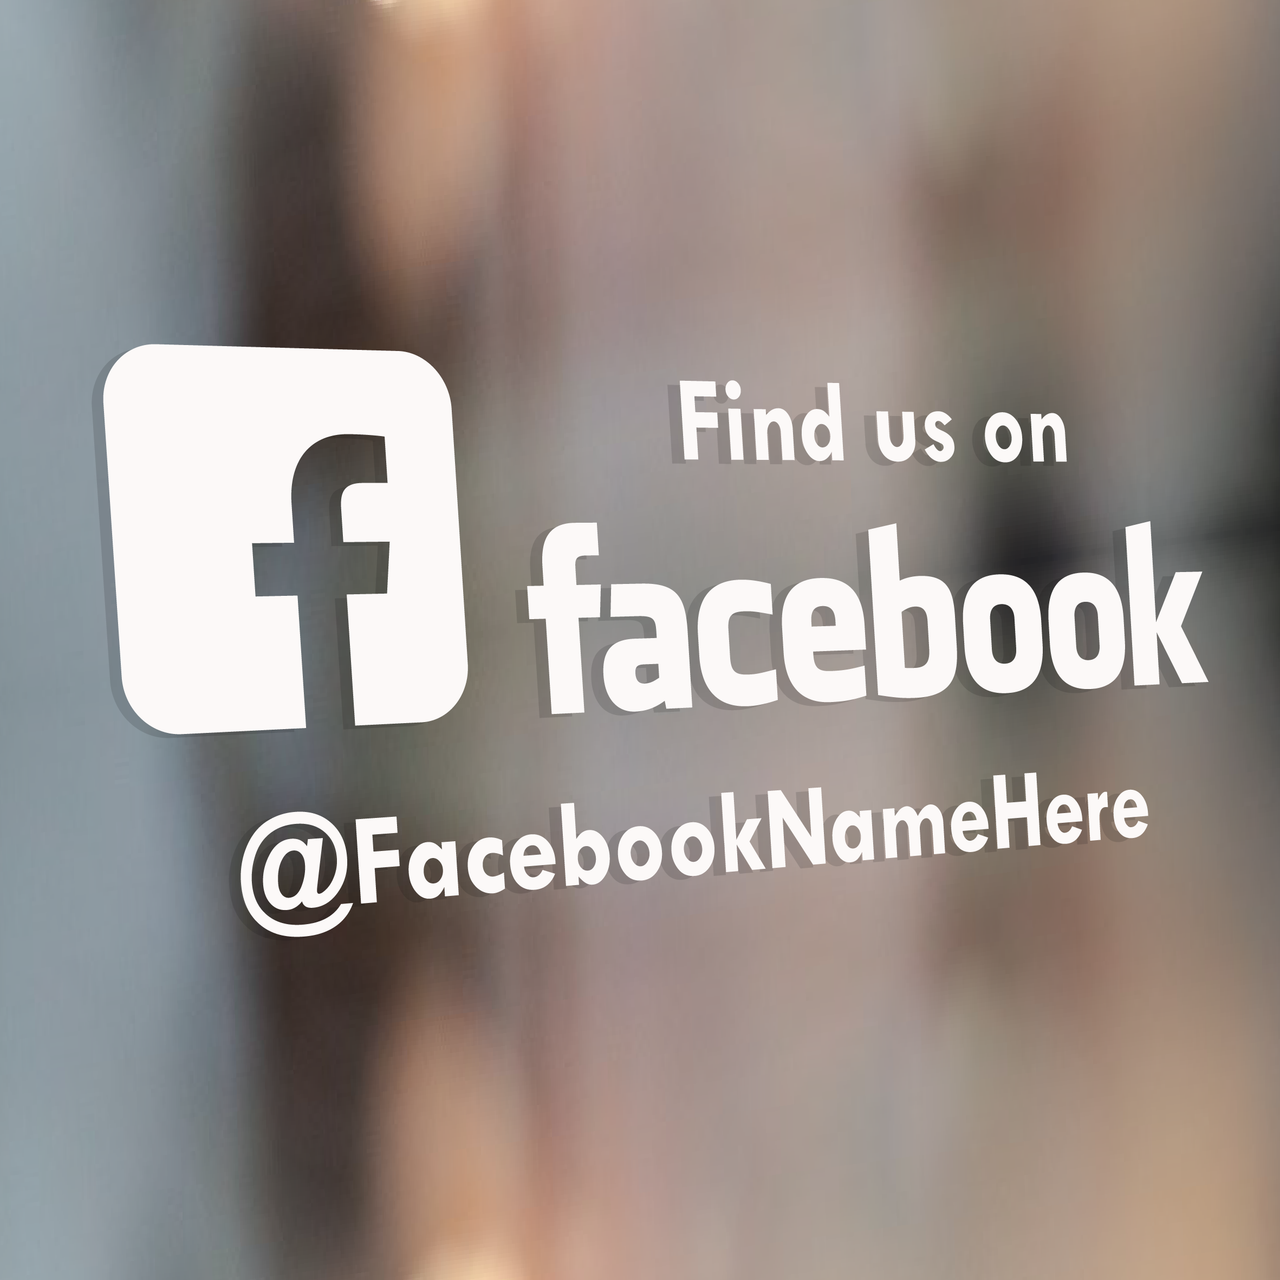 FIND US ON FACEBOOK - Social Media Window Decal (Type 1)